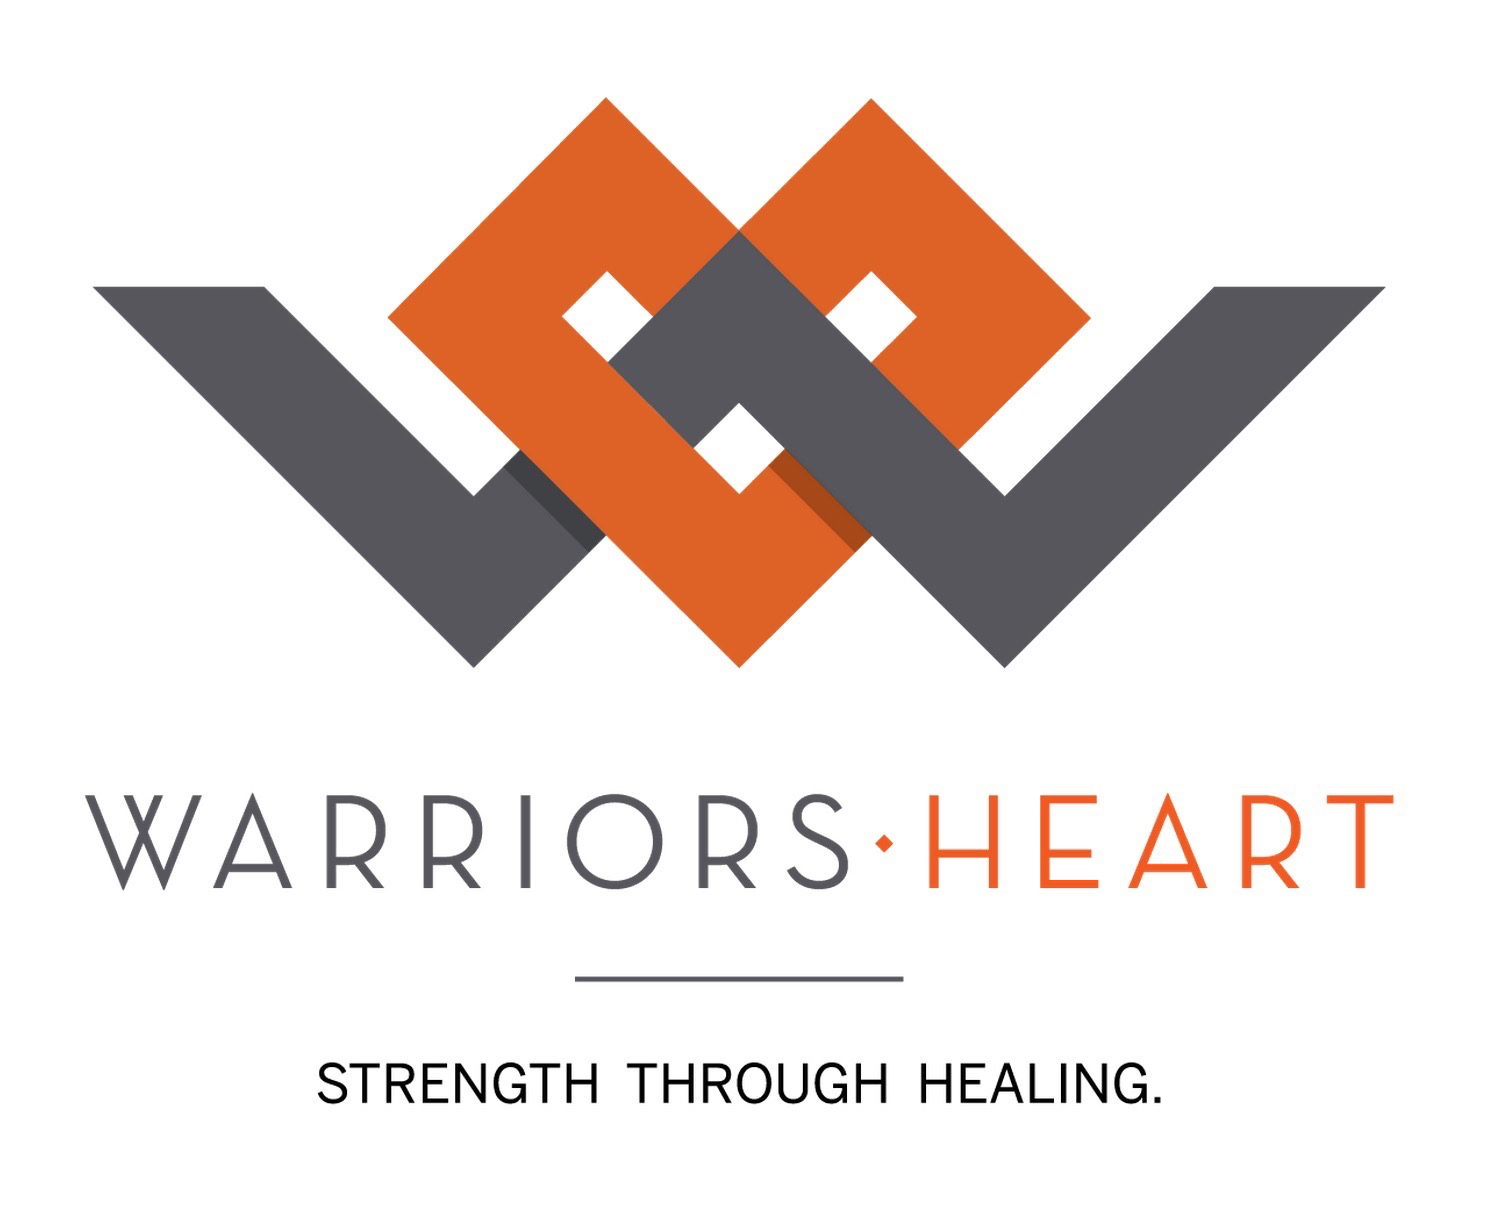 Warriors Heart is the first and only private and accredited treatment program in the U.S. for “Warriors Only” (military, veterans, first responders, and EMTs/paramedics).